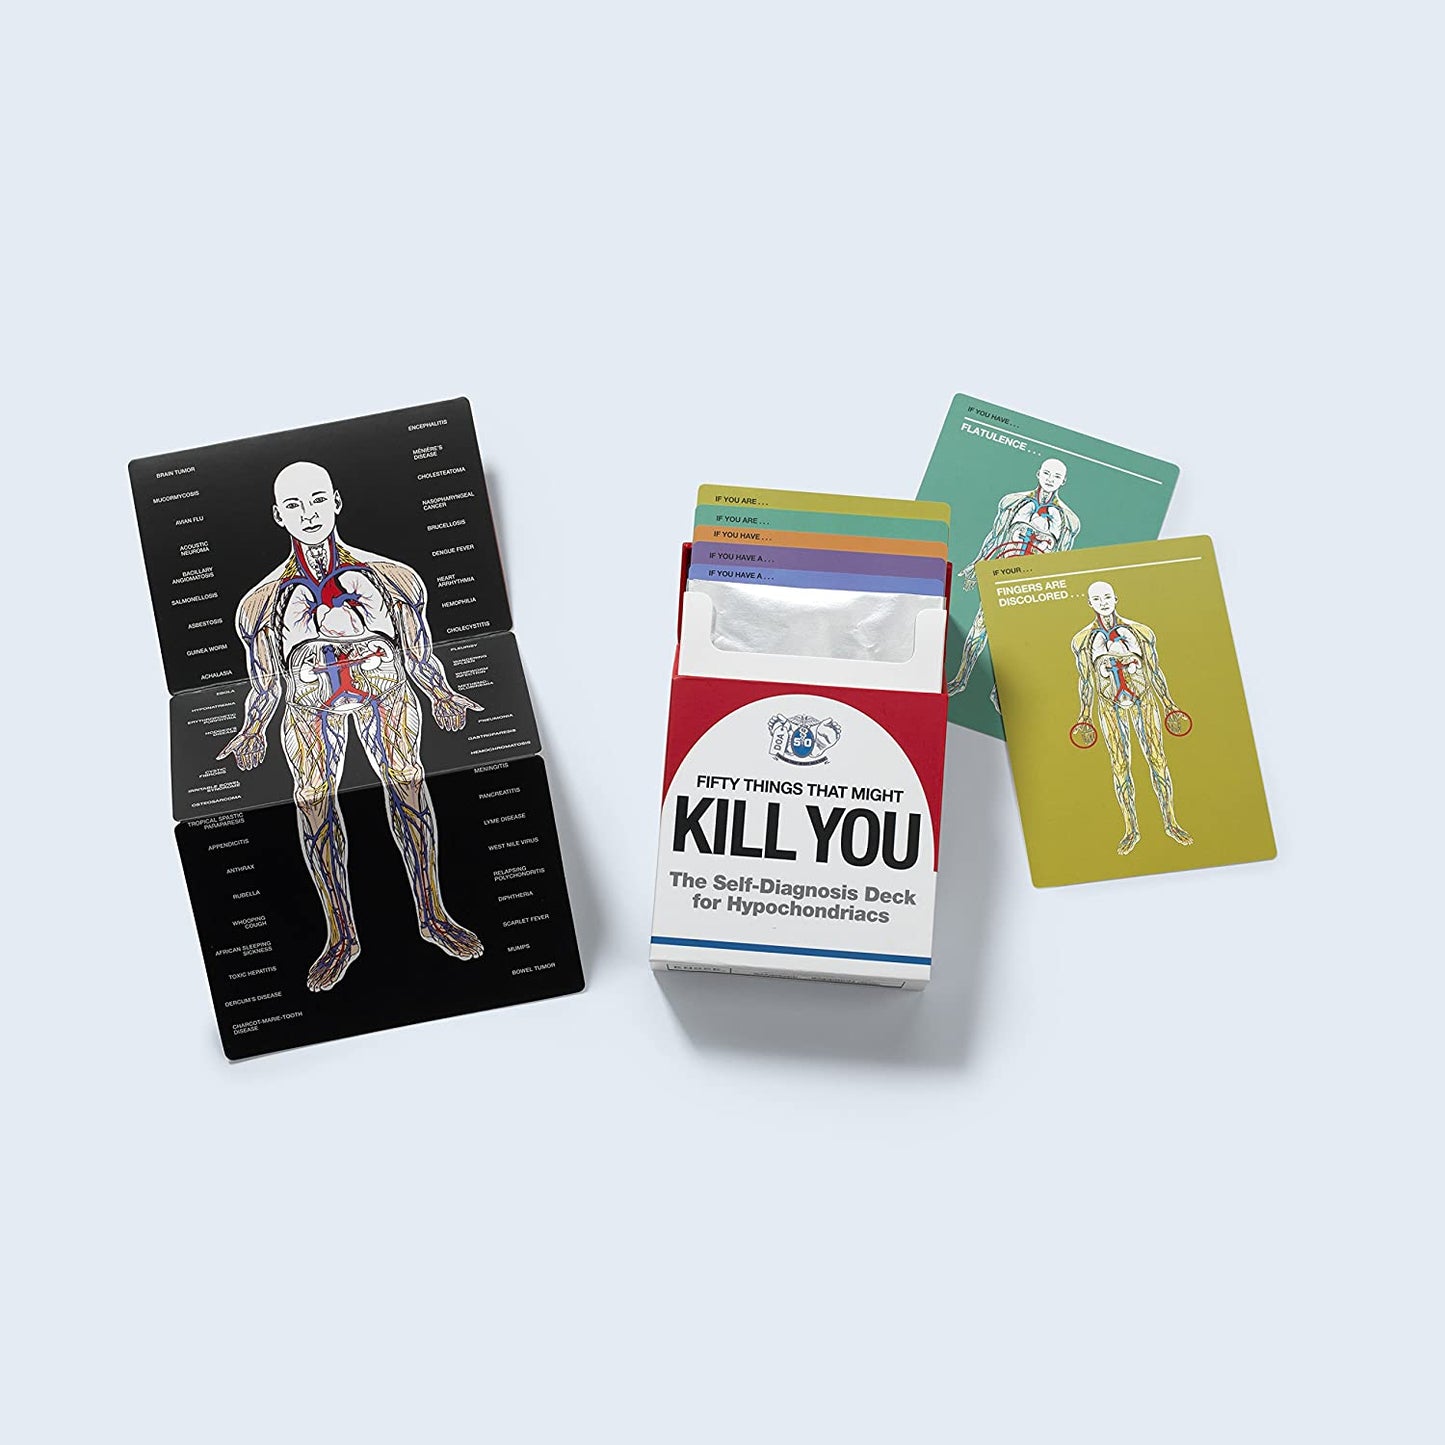 50 Things that Might Kill You: Self-Diagnosis Card Deck for Hypochondriacs